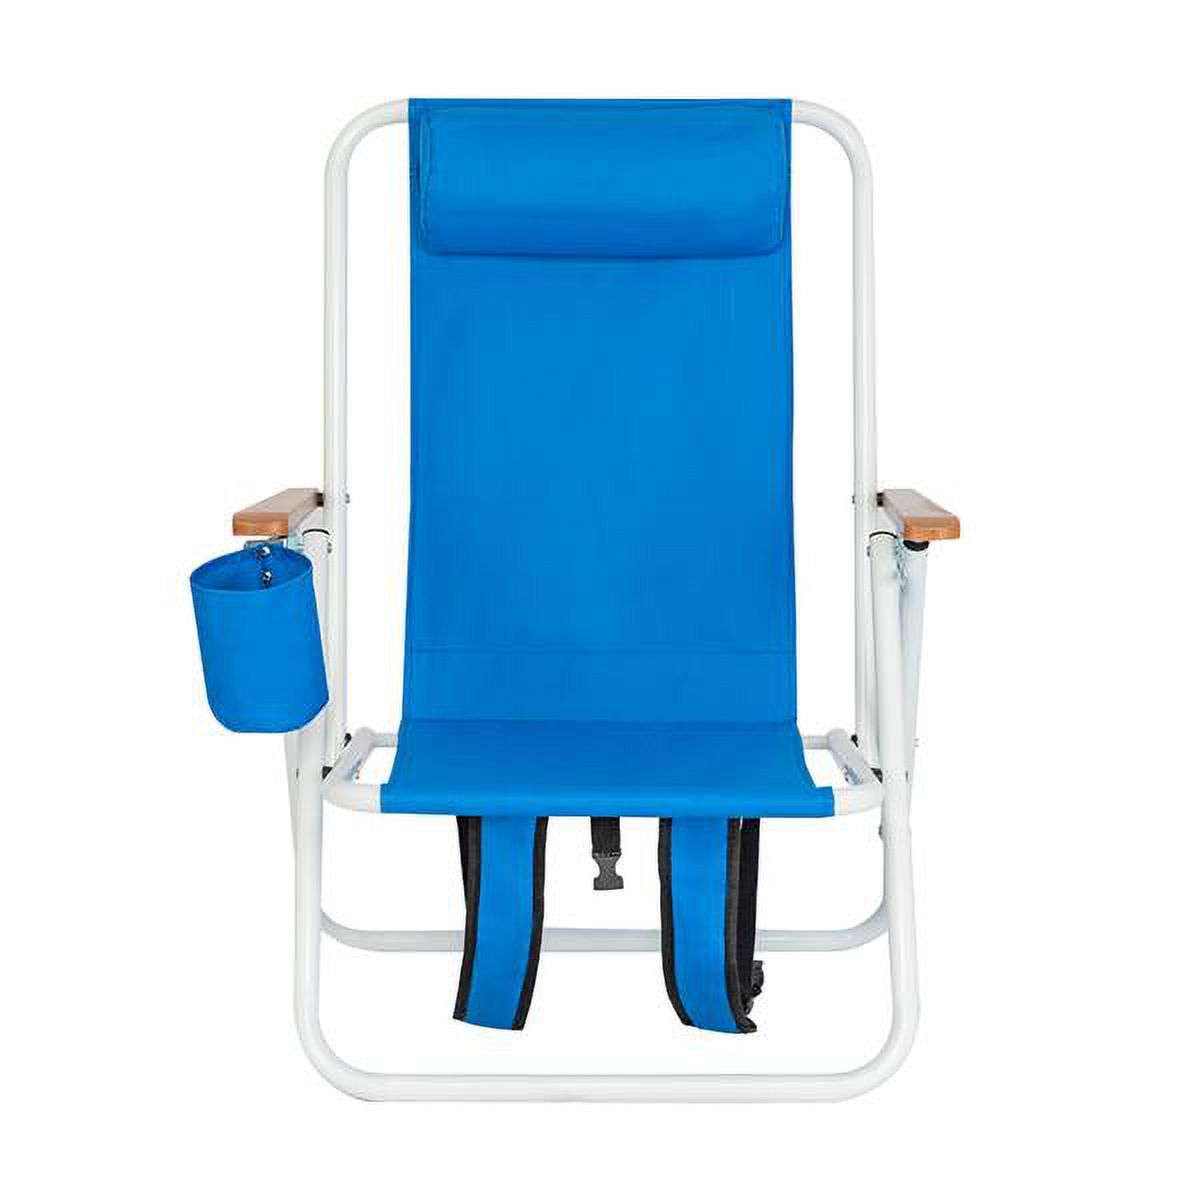 Folding Beach Chair Portable Backpack Beach Chair Patio Folding Lightweight Camping Chairs Outdoor Garden Park Pool Side Lounge Chair with Cup Holder, Blue - image 1 of 10